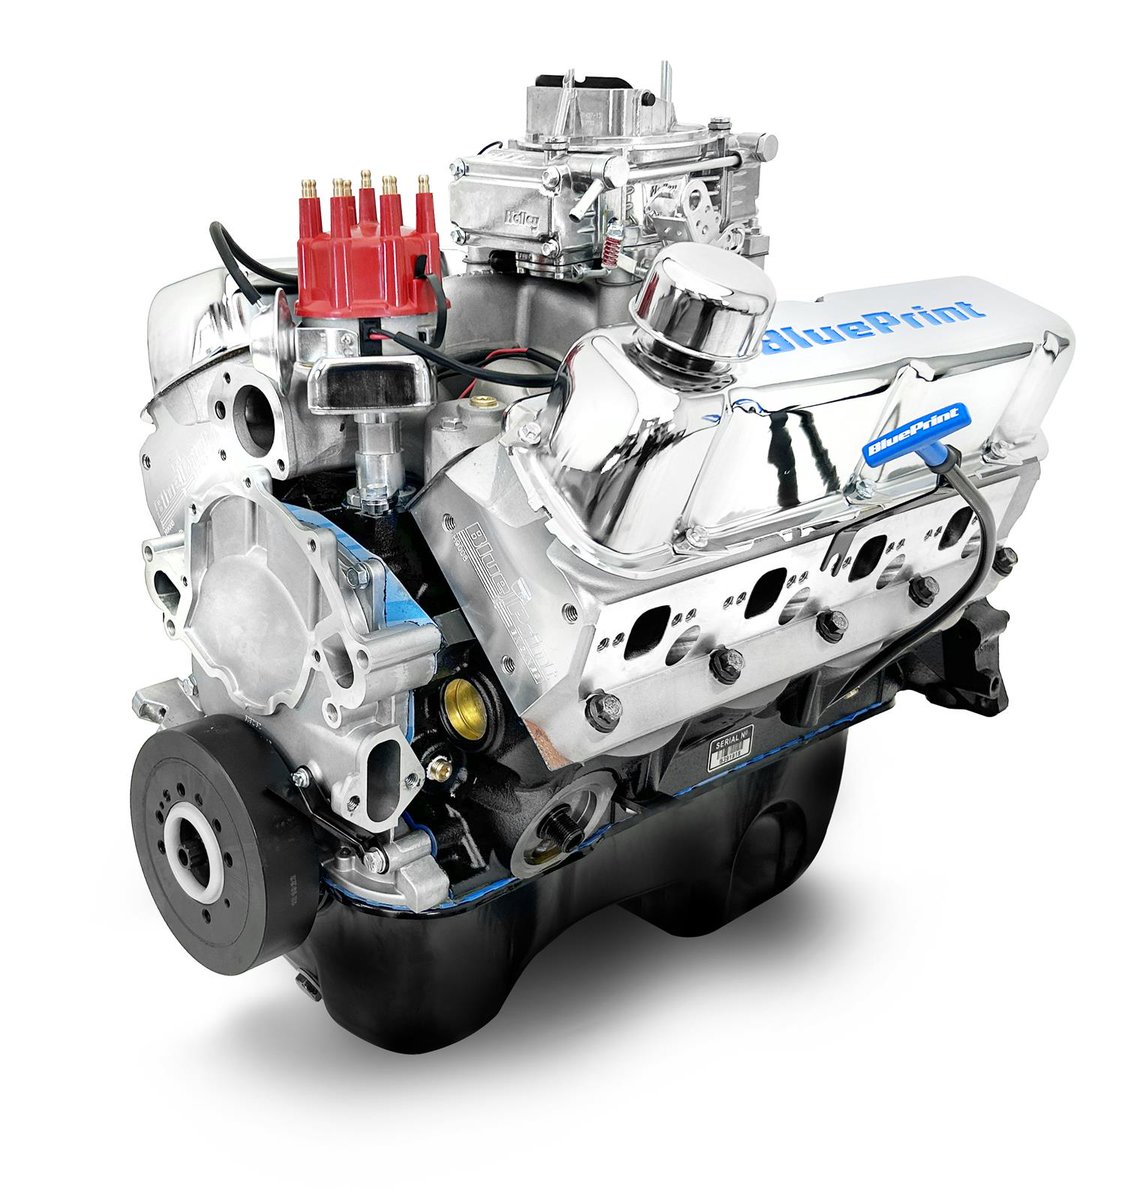 Drop Some Horsepower in Your Blue Oval Ride with a BluePrint Engines 302 or 347 CID Small Block Ford Crate Engine summitracing.com/newsandevents/…